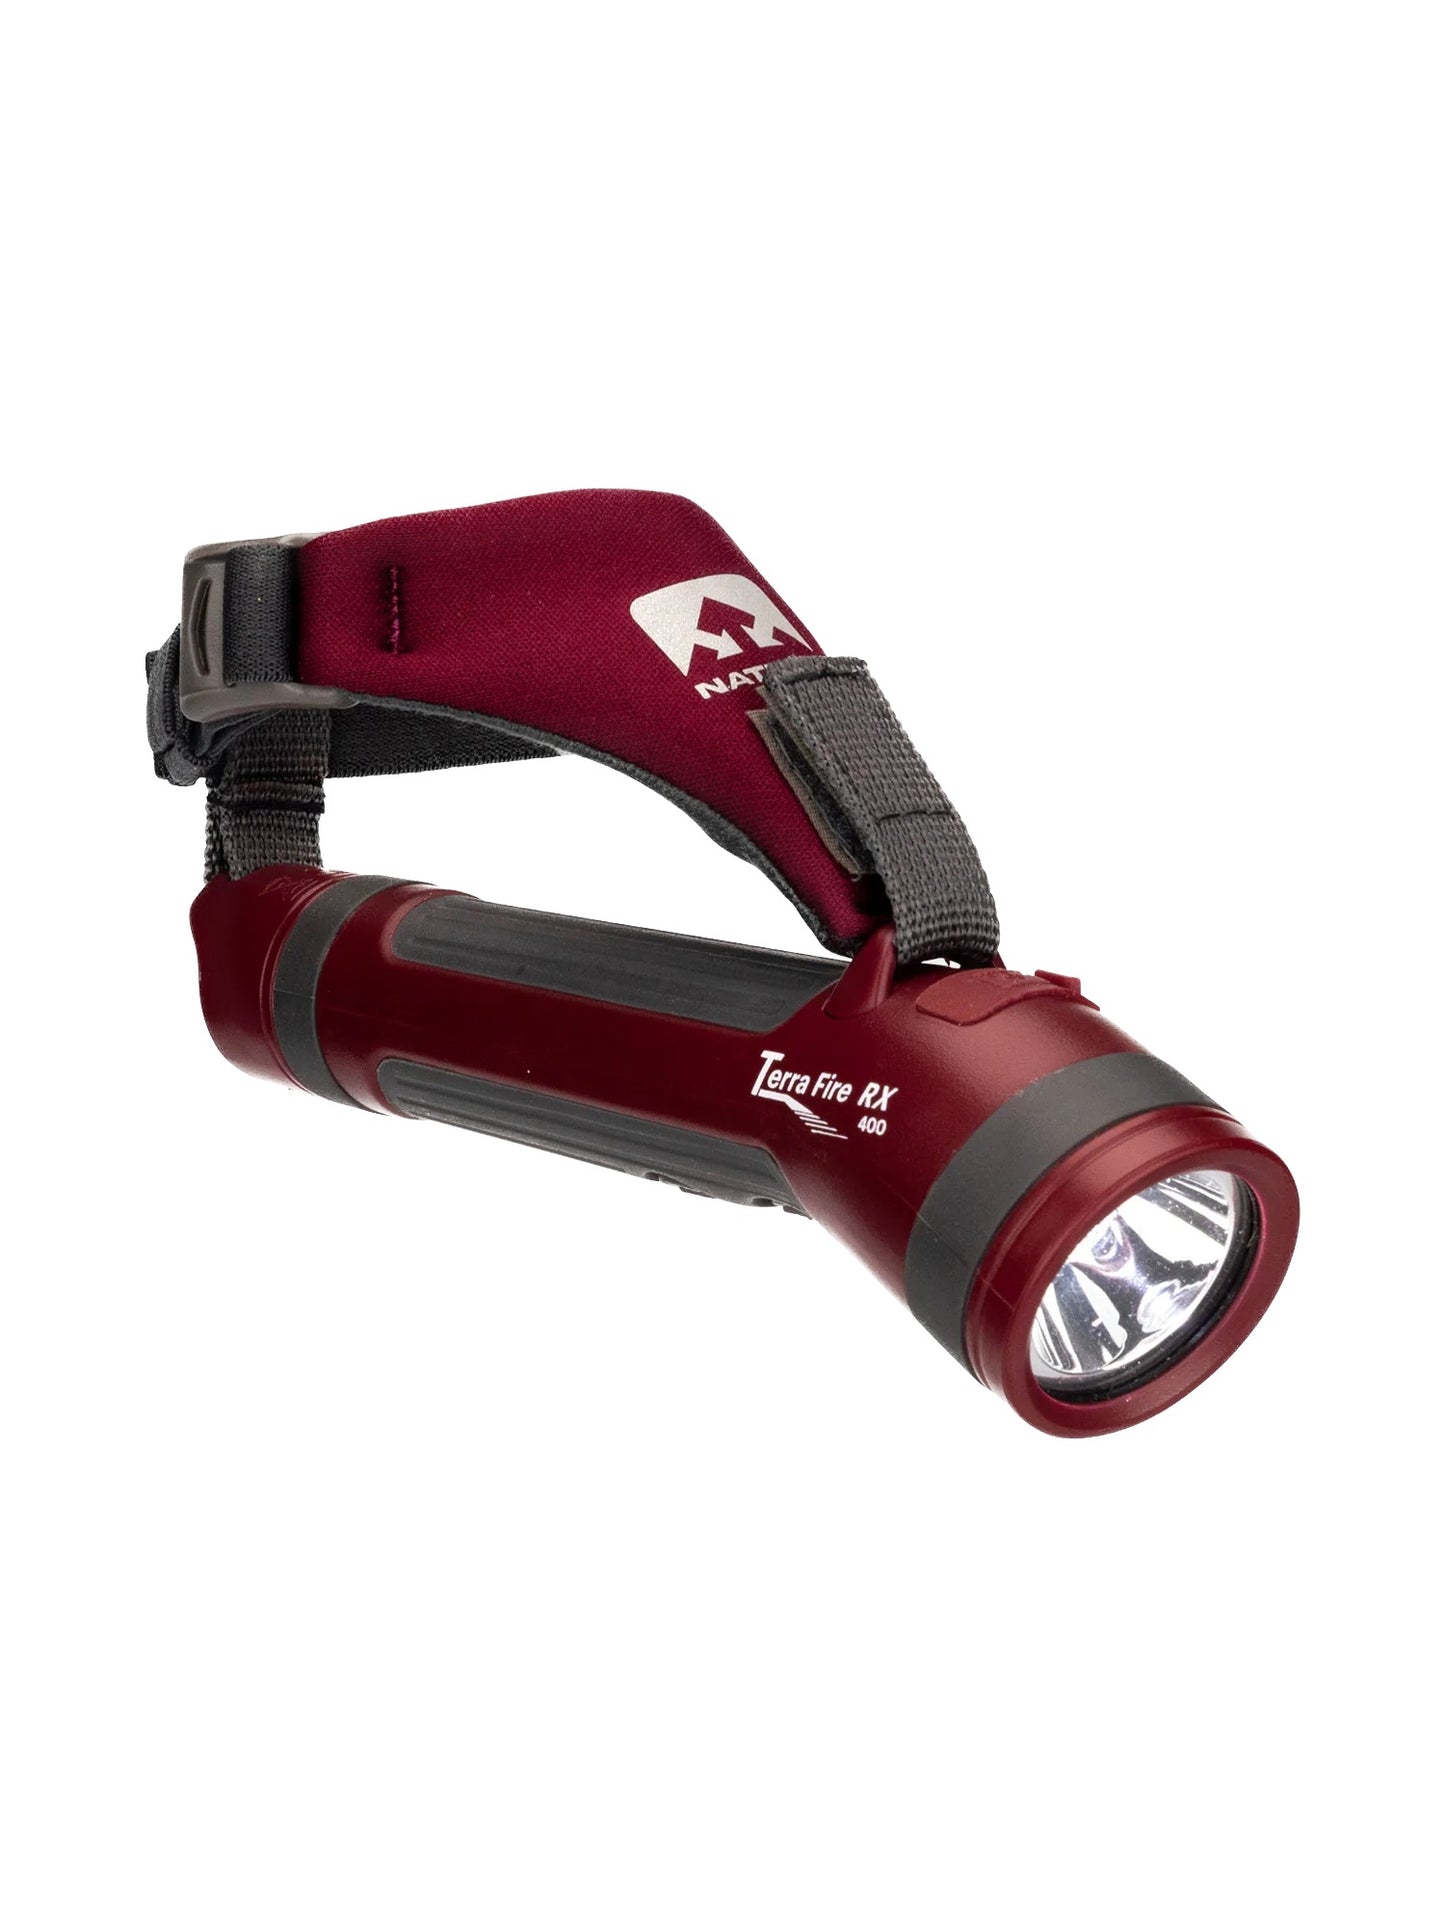 TERRA FIRE HAND TORCH 400 RECHARGEABLE